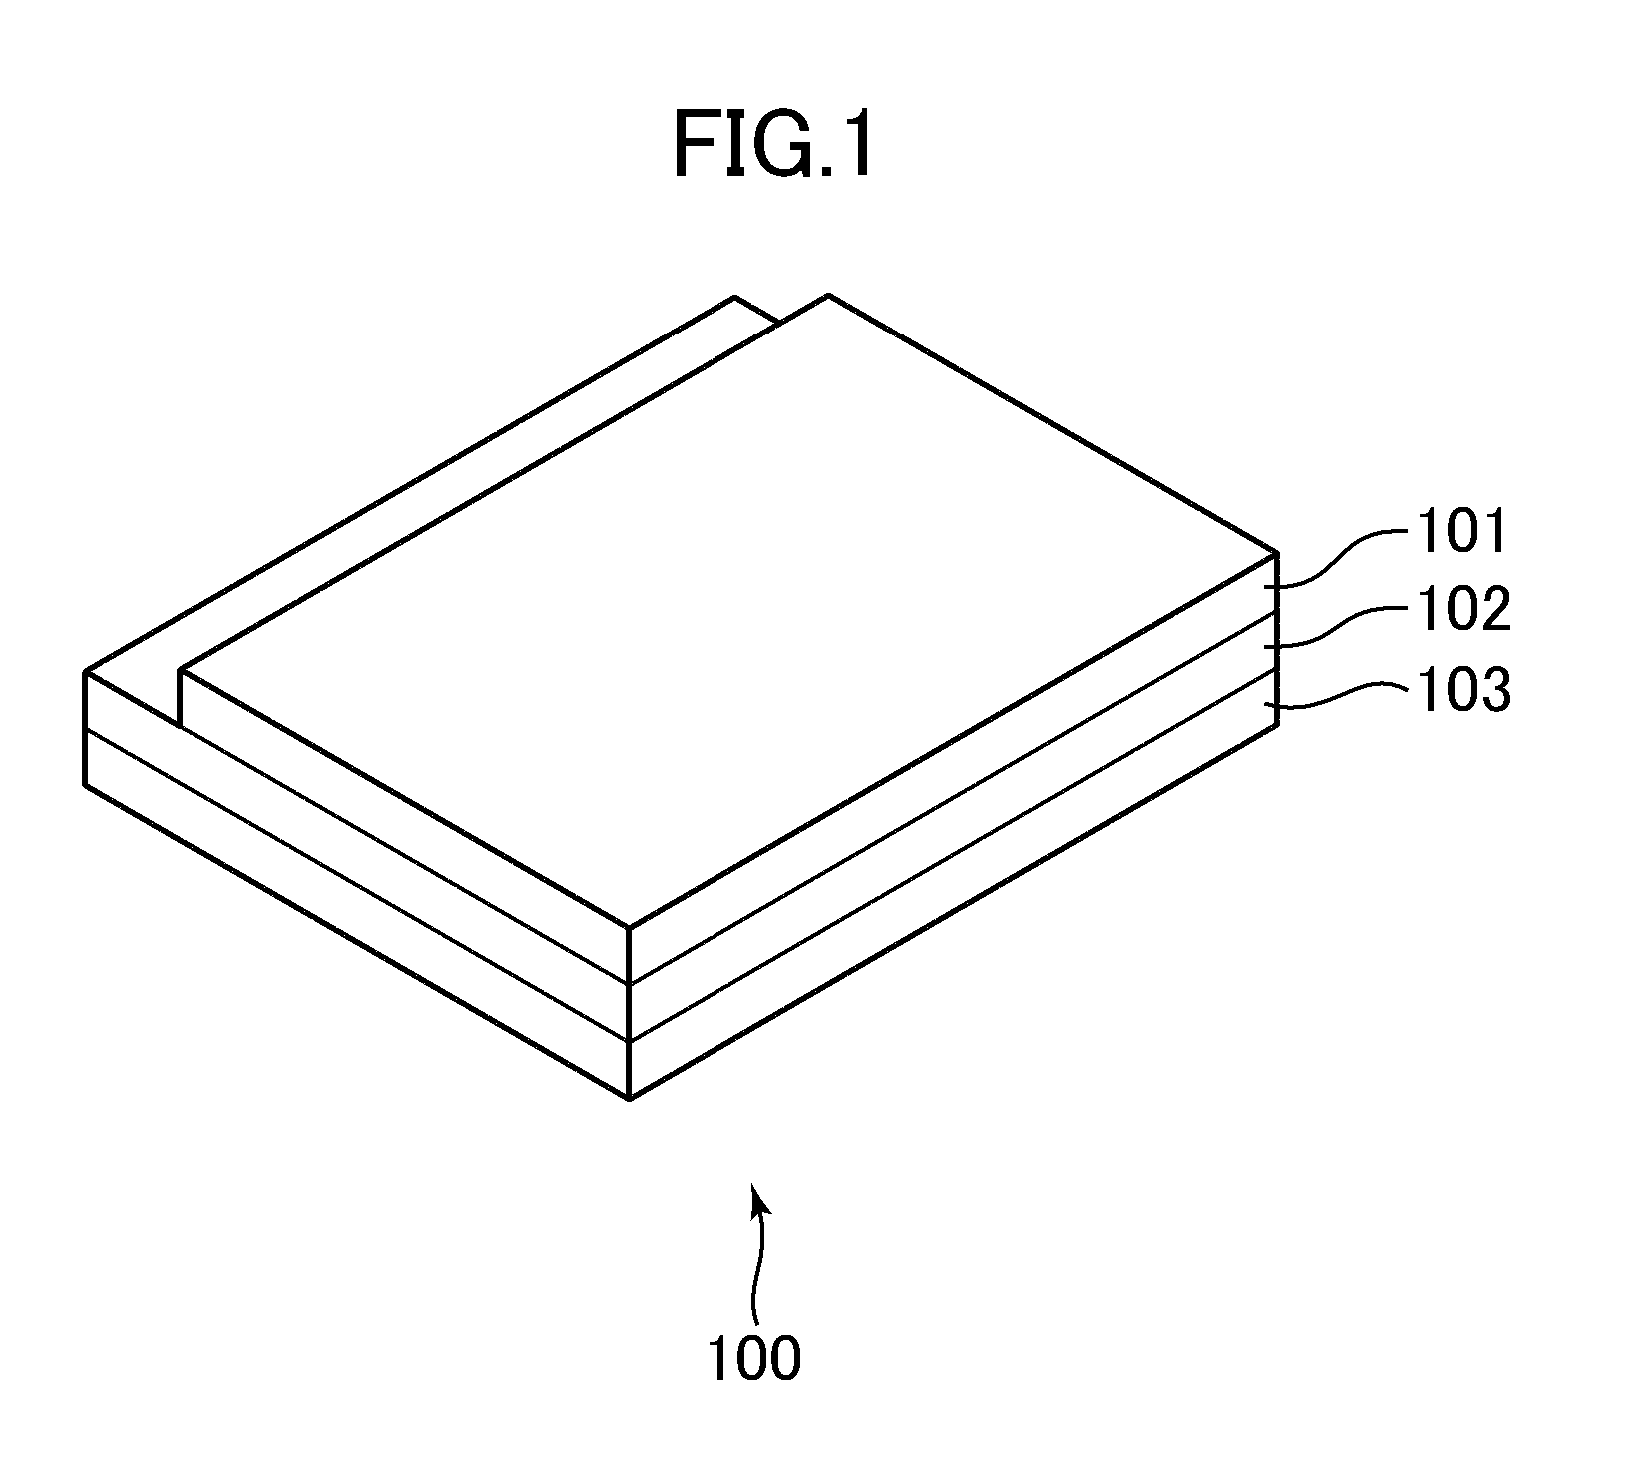 Display device including a data selector circuit